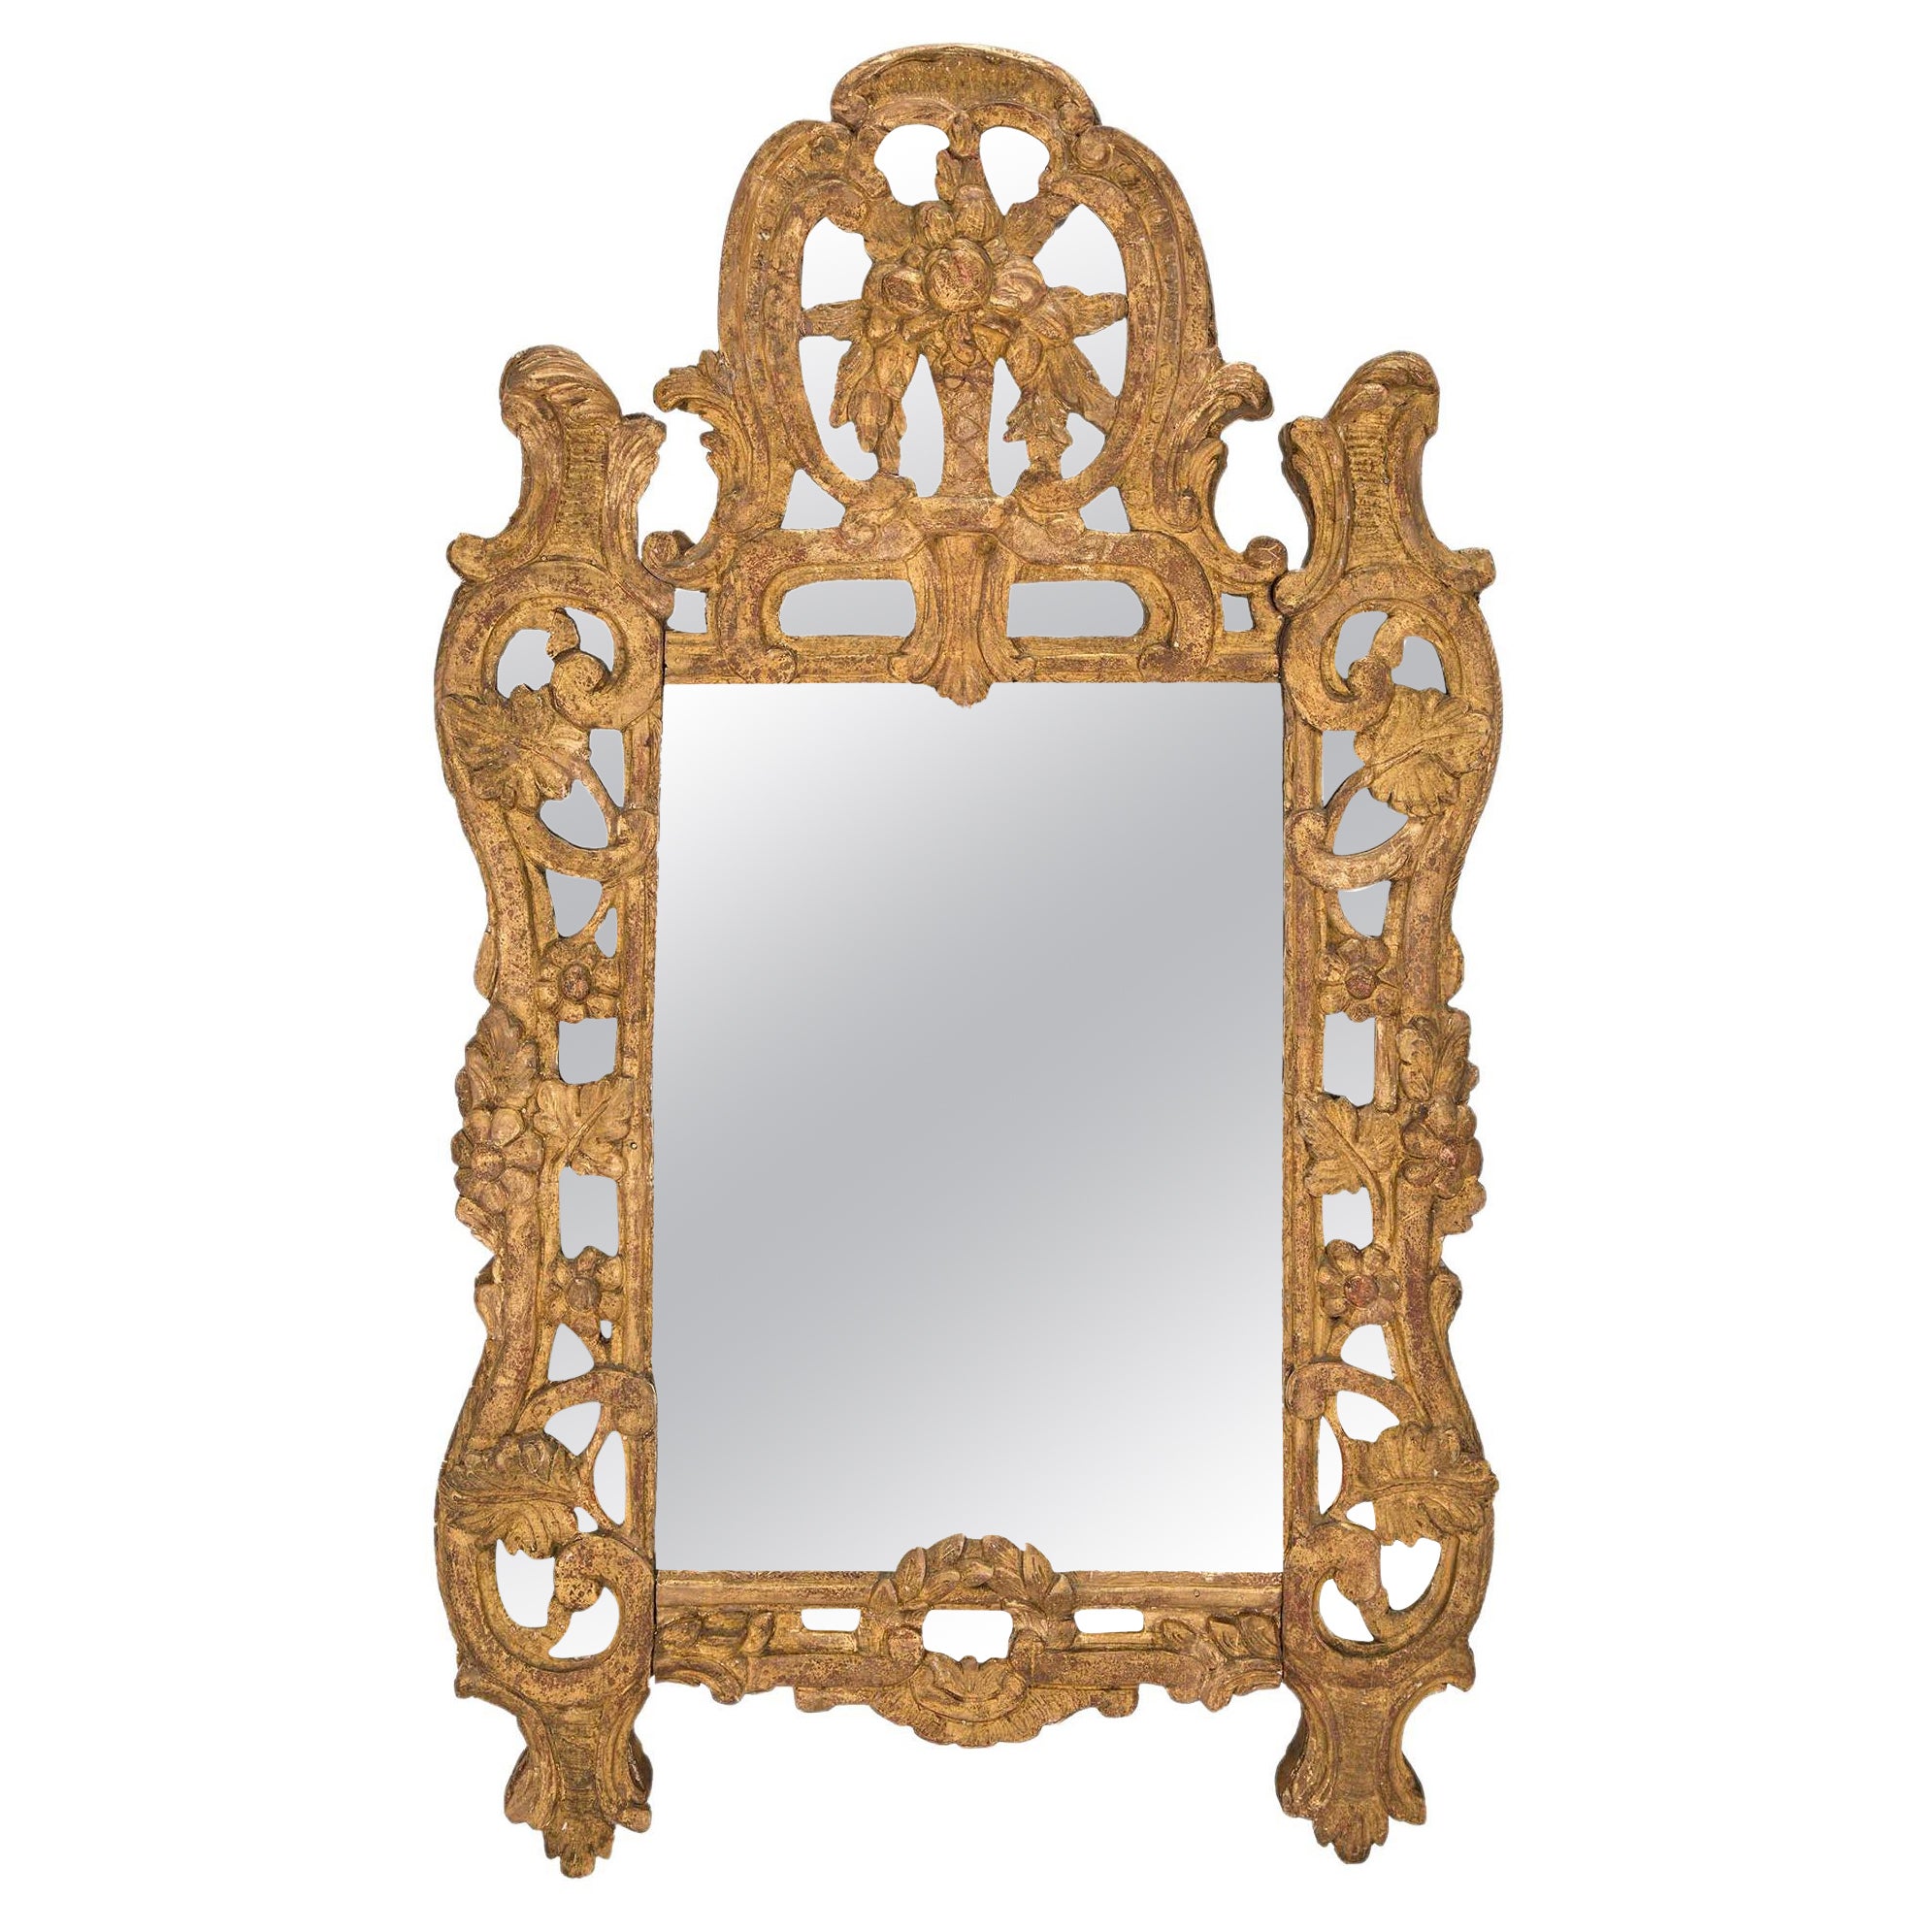 French 18th Century Régence Period Giltwood Mirror